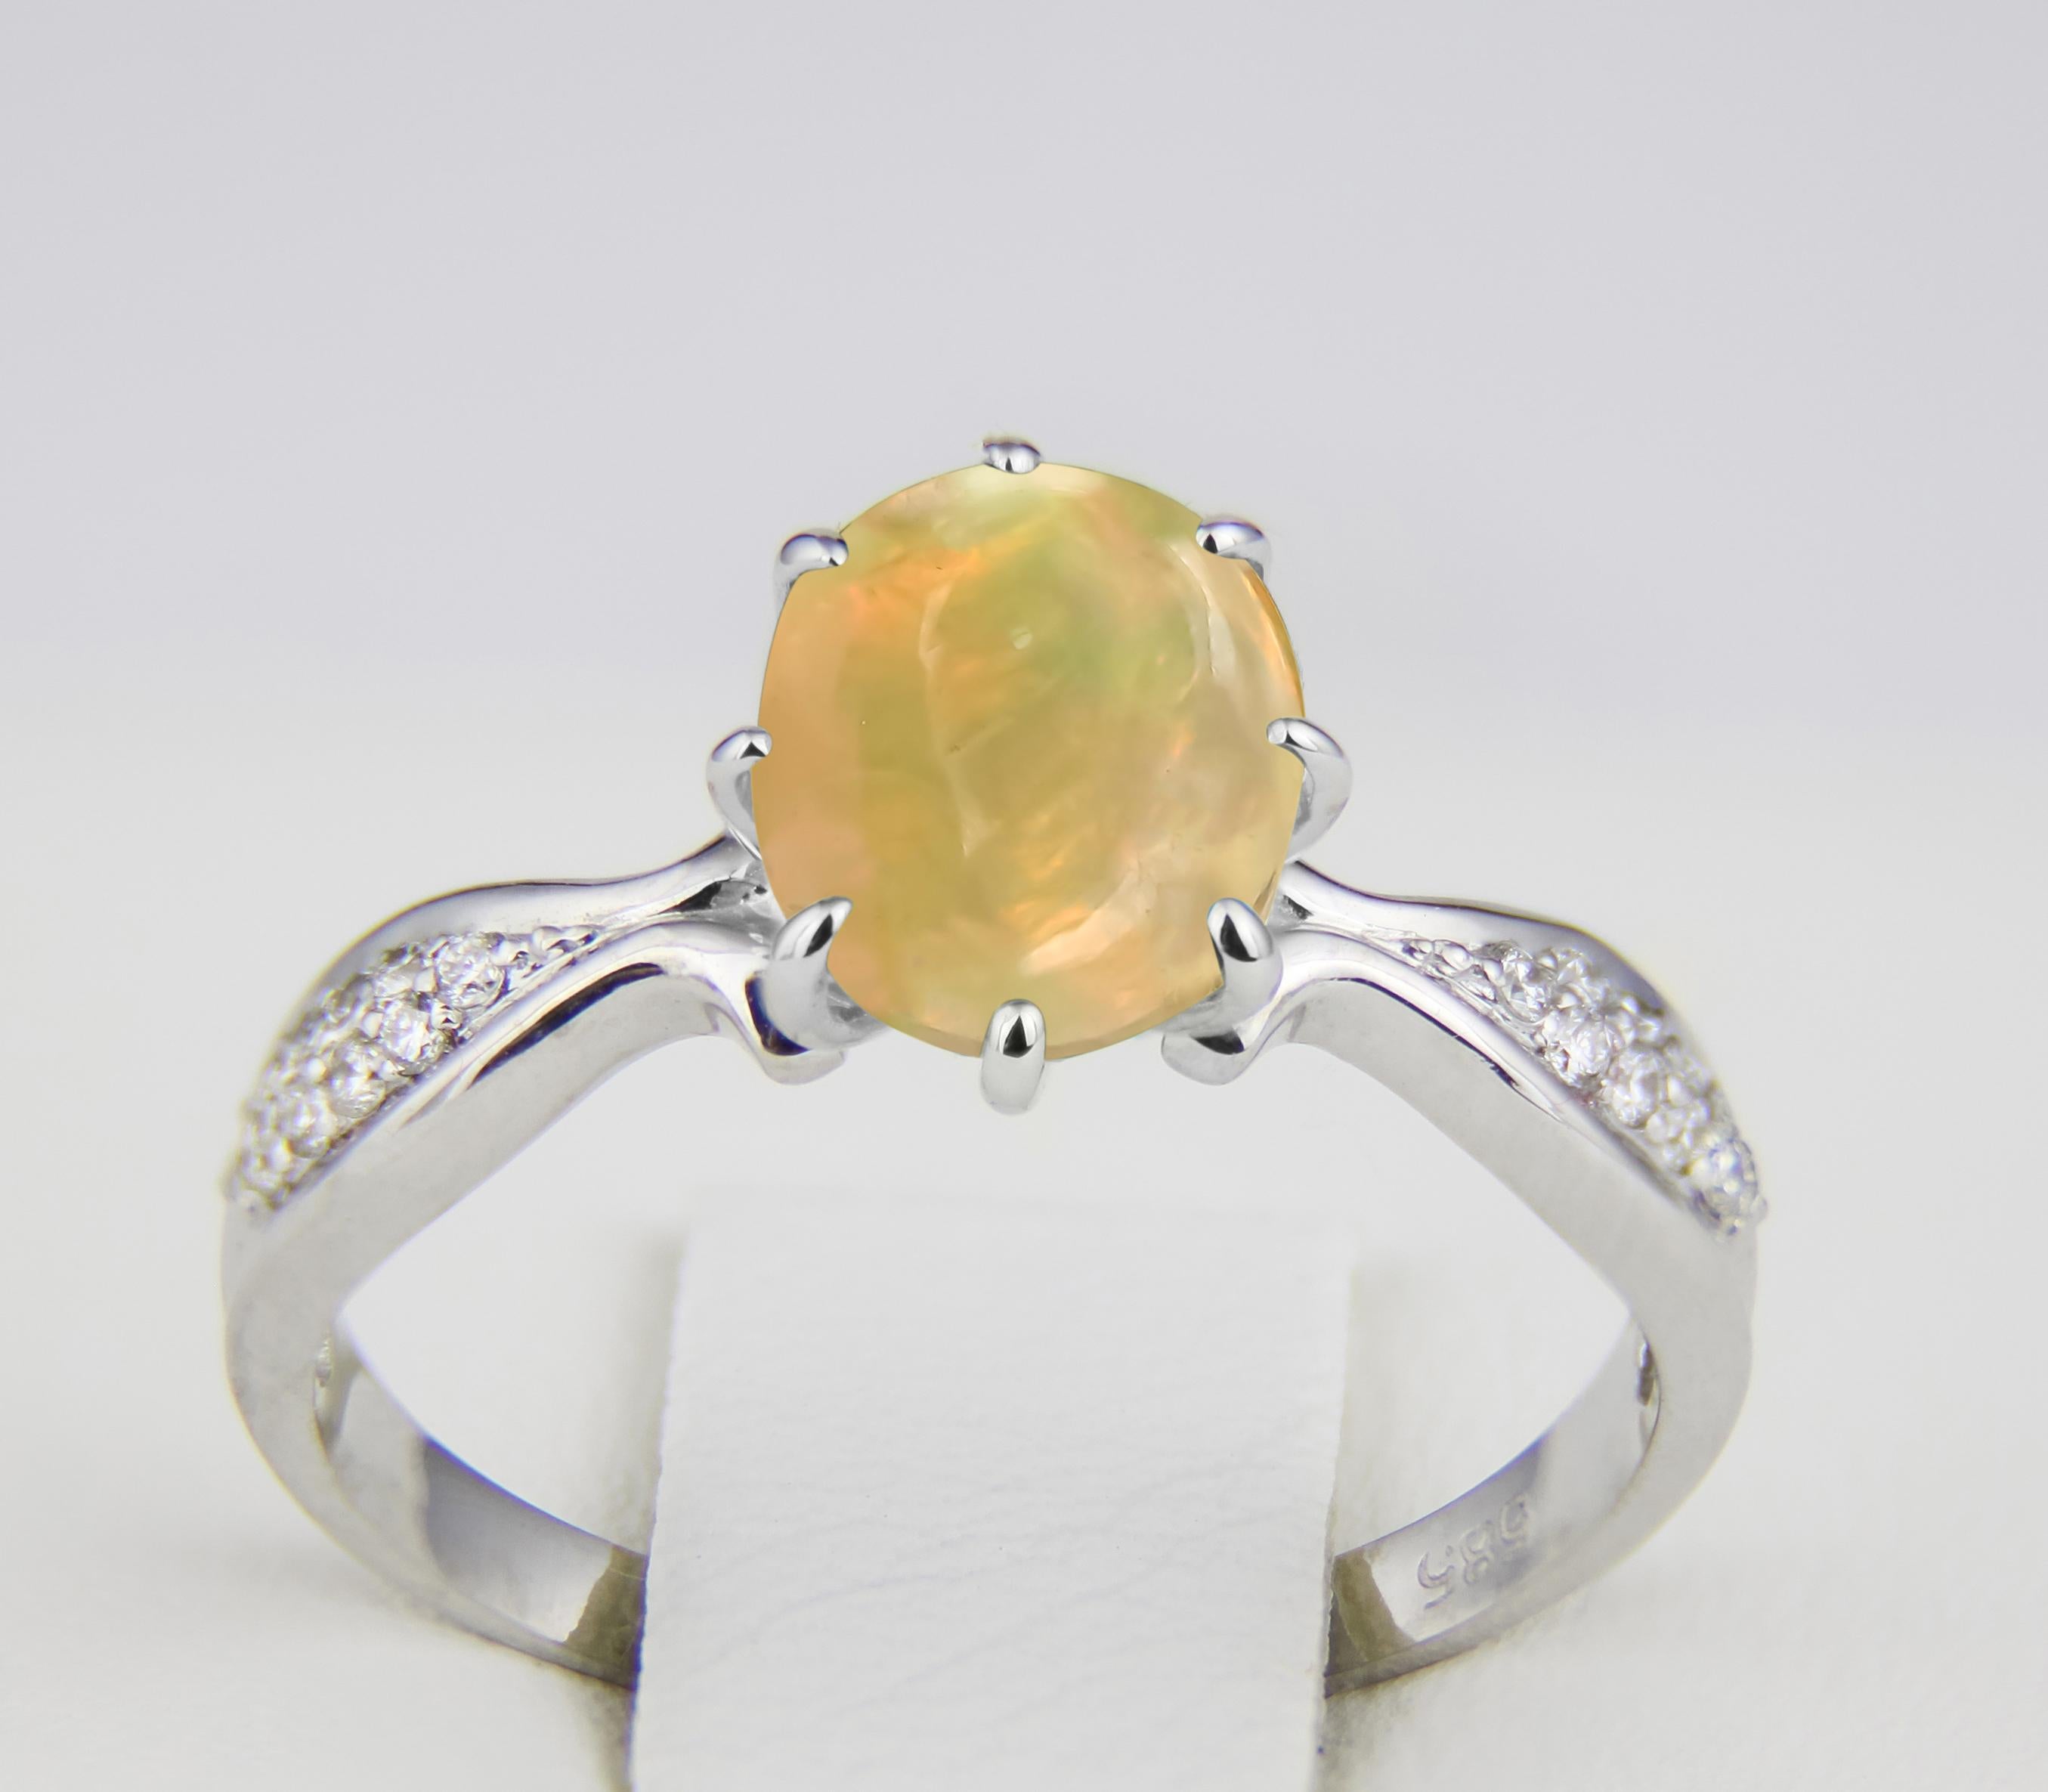 For Sale:  Opal 14k Gold Ring, Cabochon Opal Ring, Opal Gold Ring 3